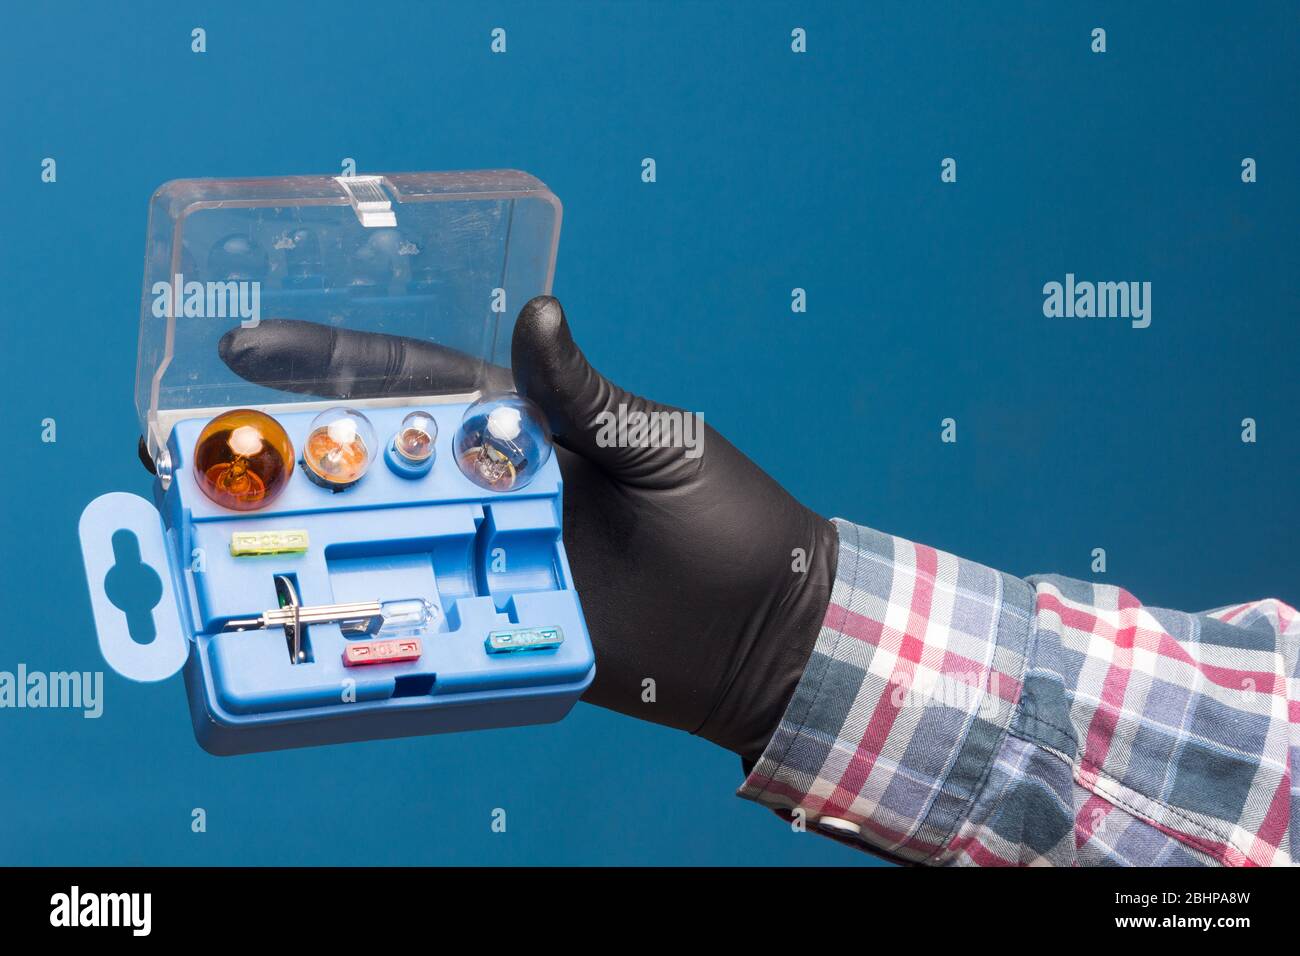 Lights and mandatory replacement material for cars in a plastic box and on hand with black glove and blue background Stock Photo